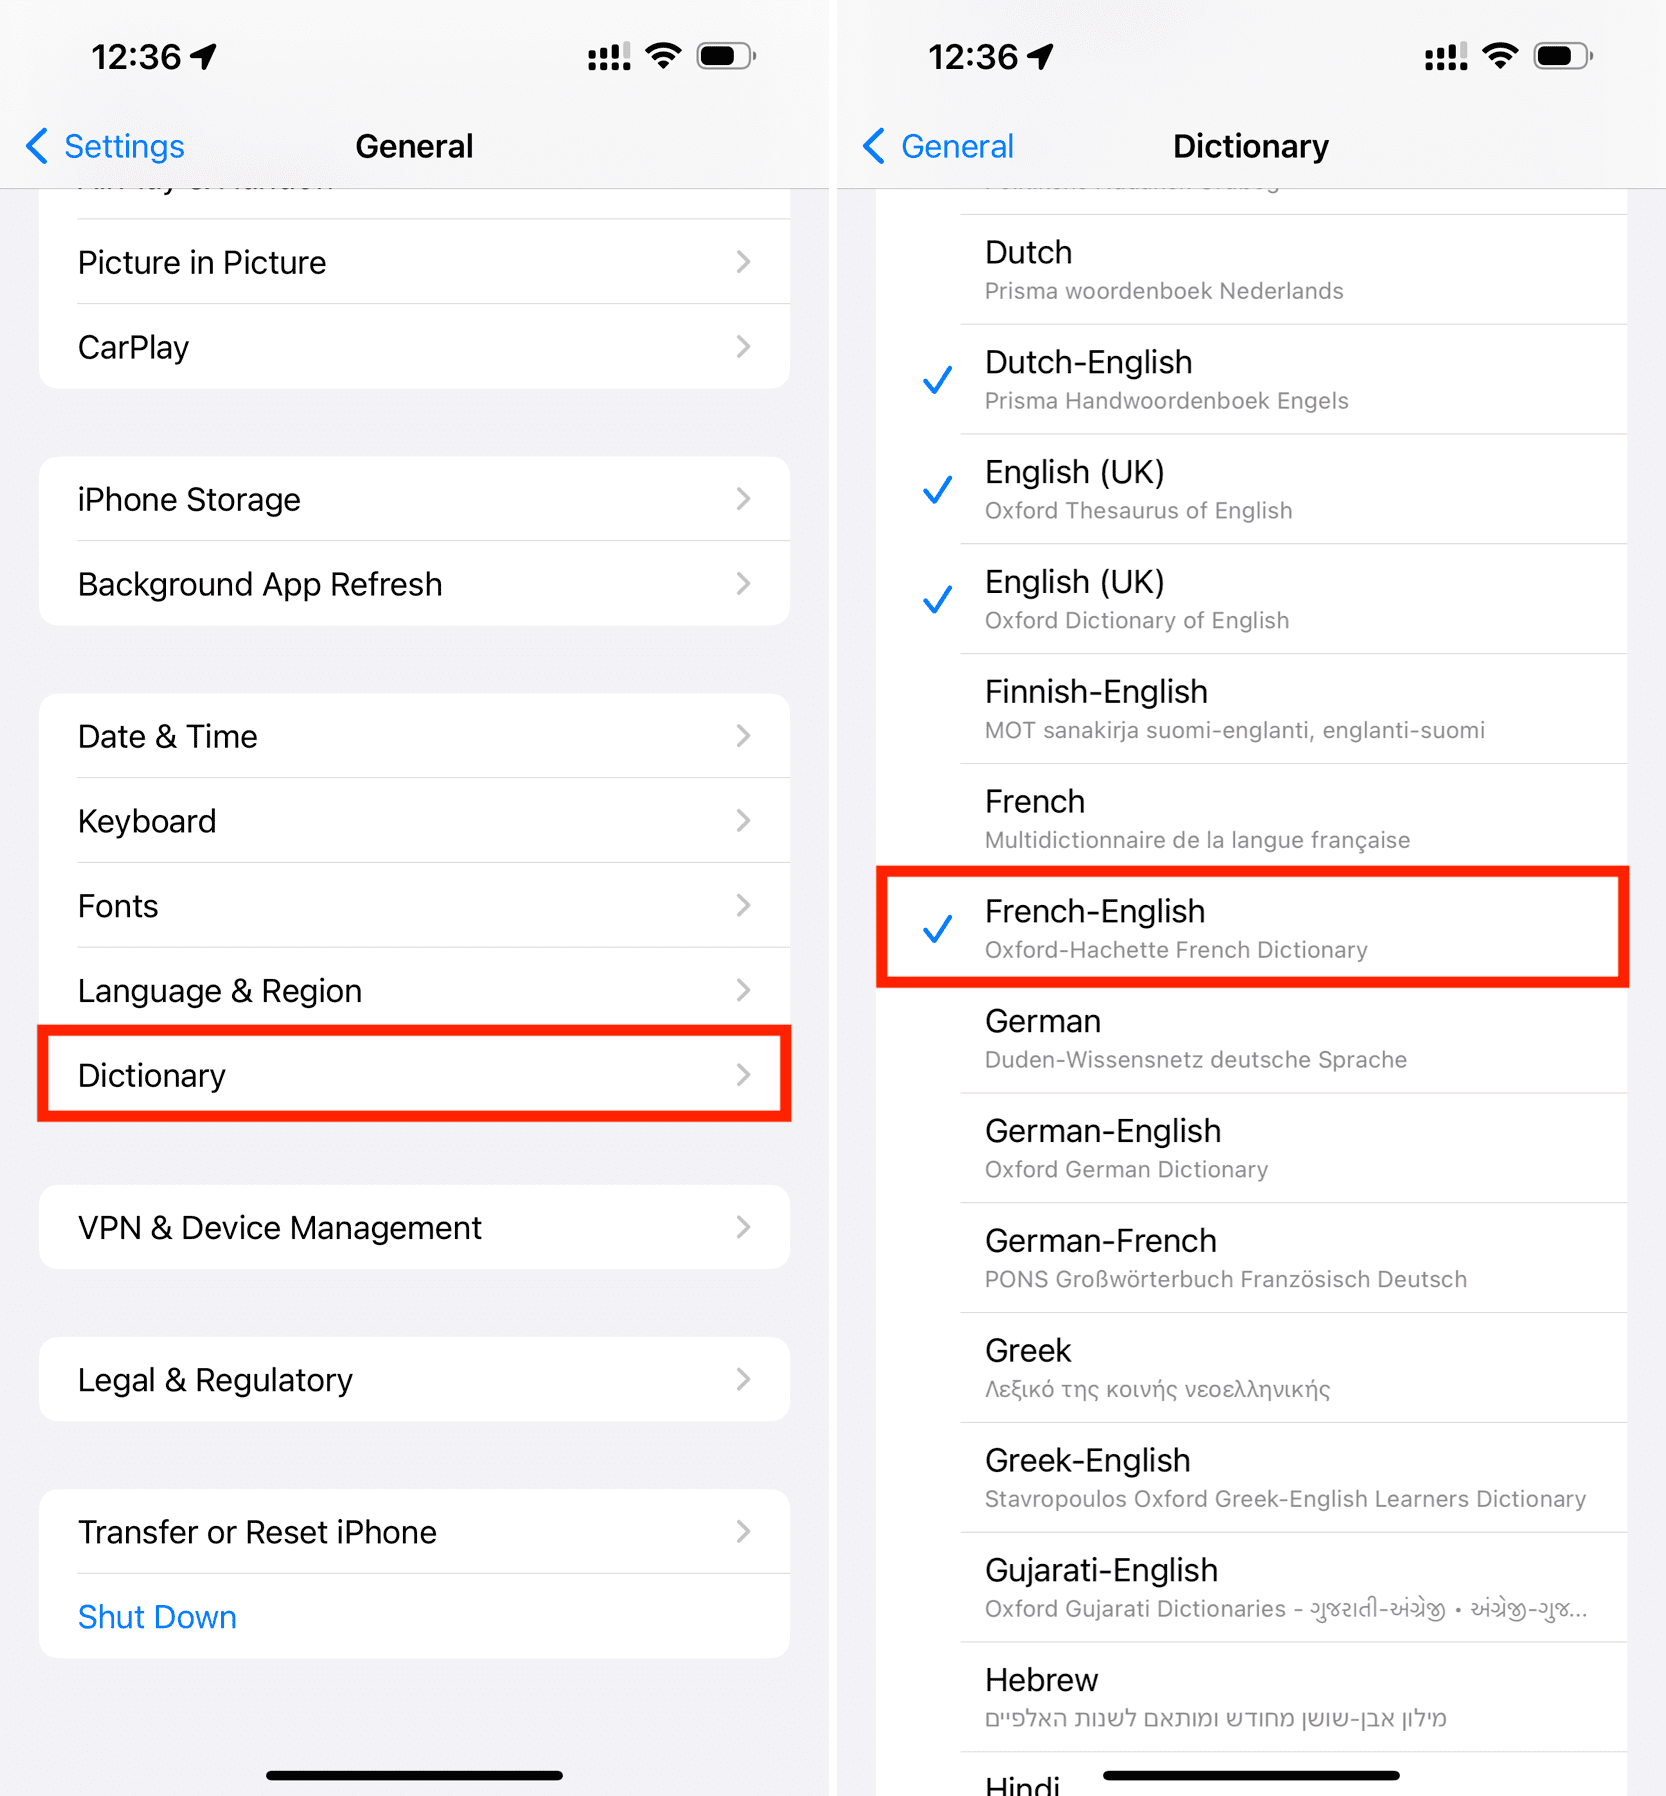 Downloading dictionary for translate in Look Up in iPhone settings